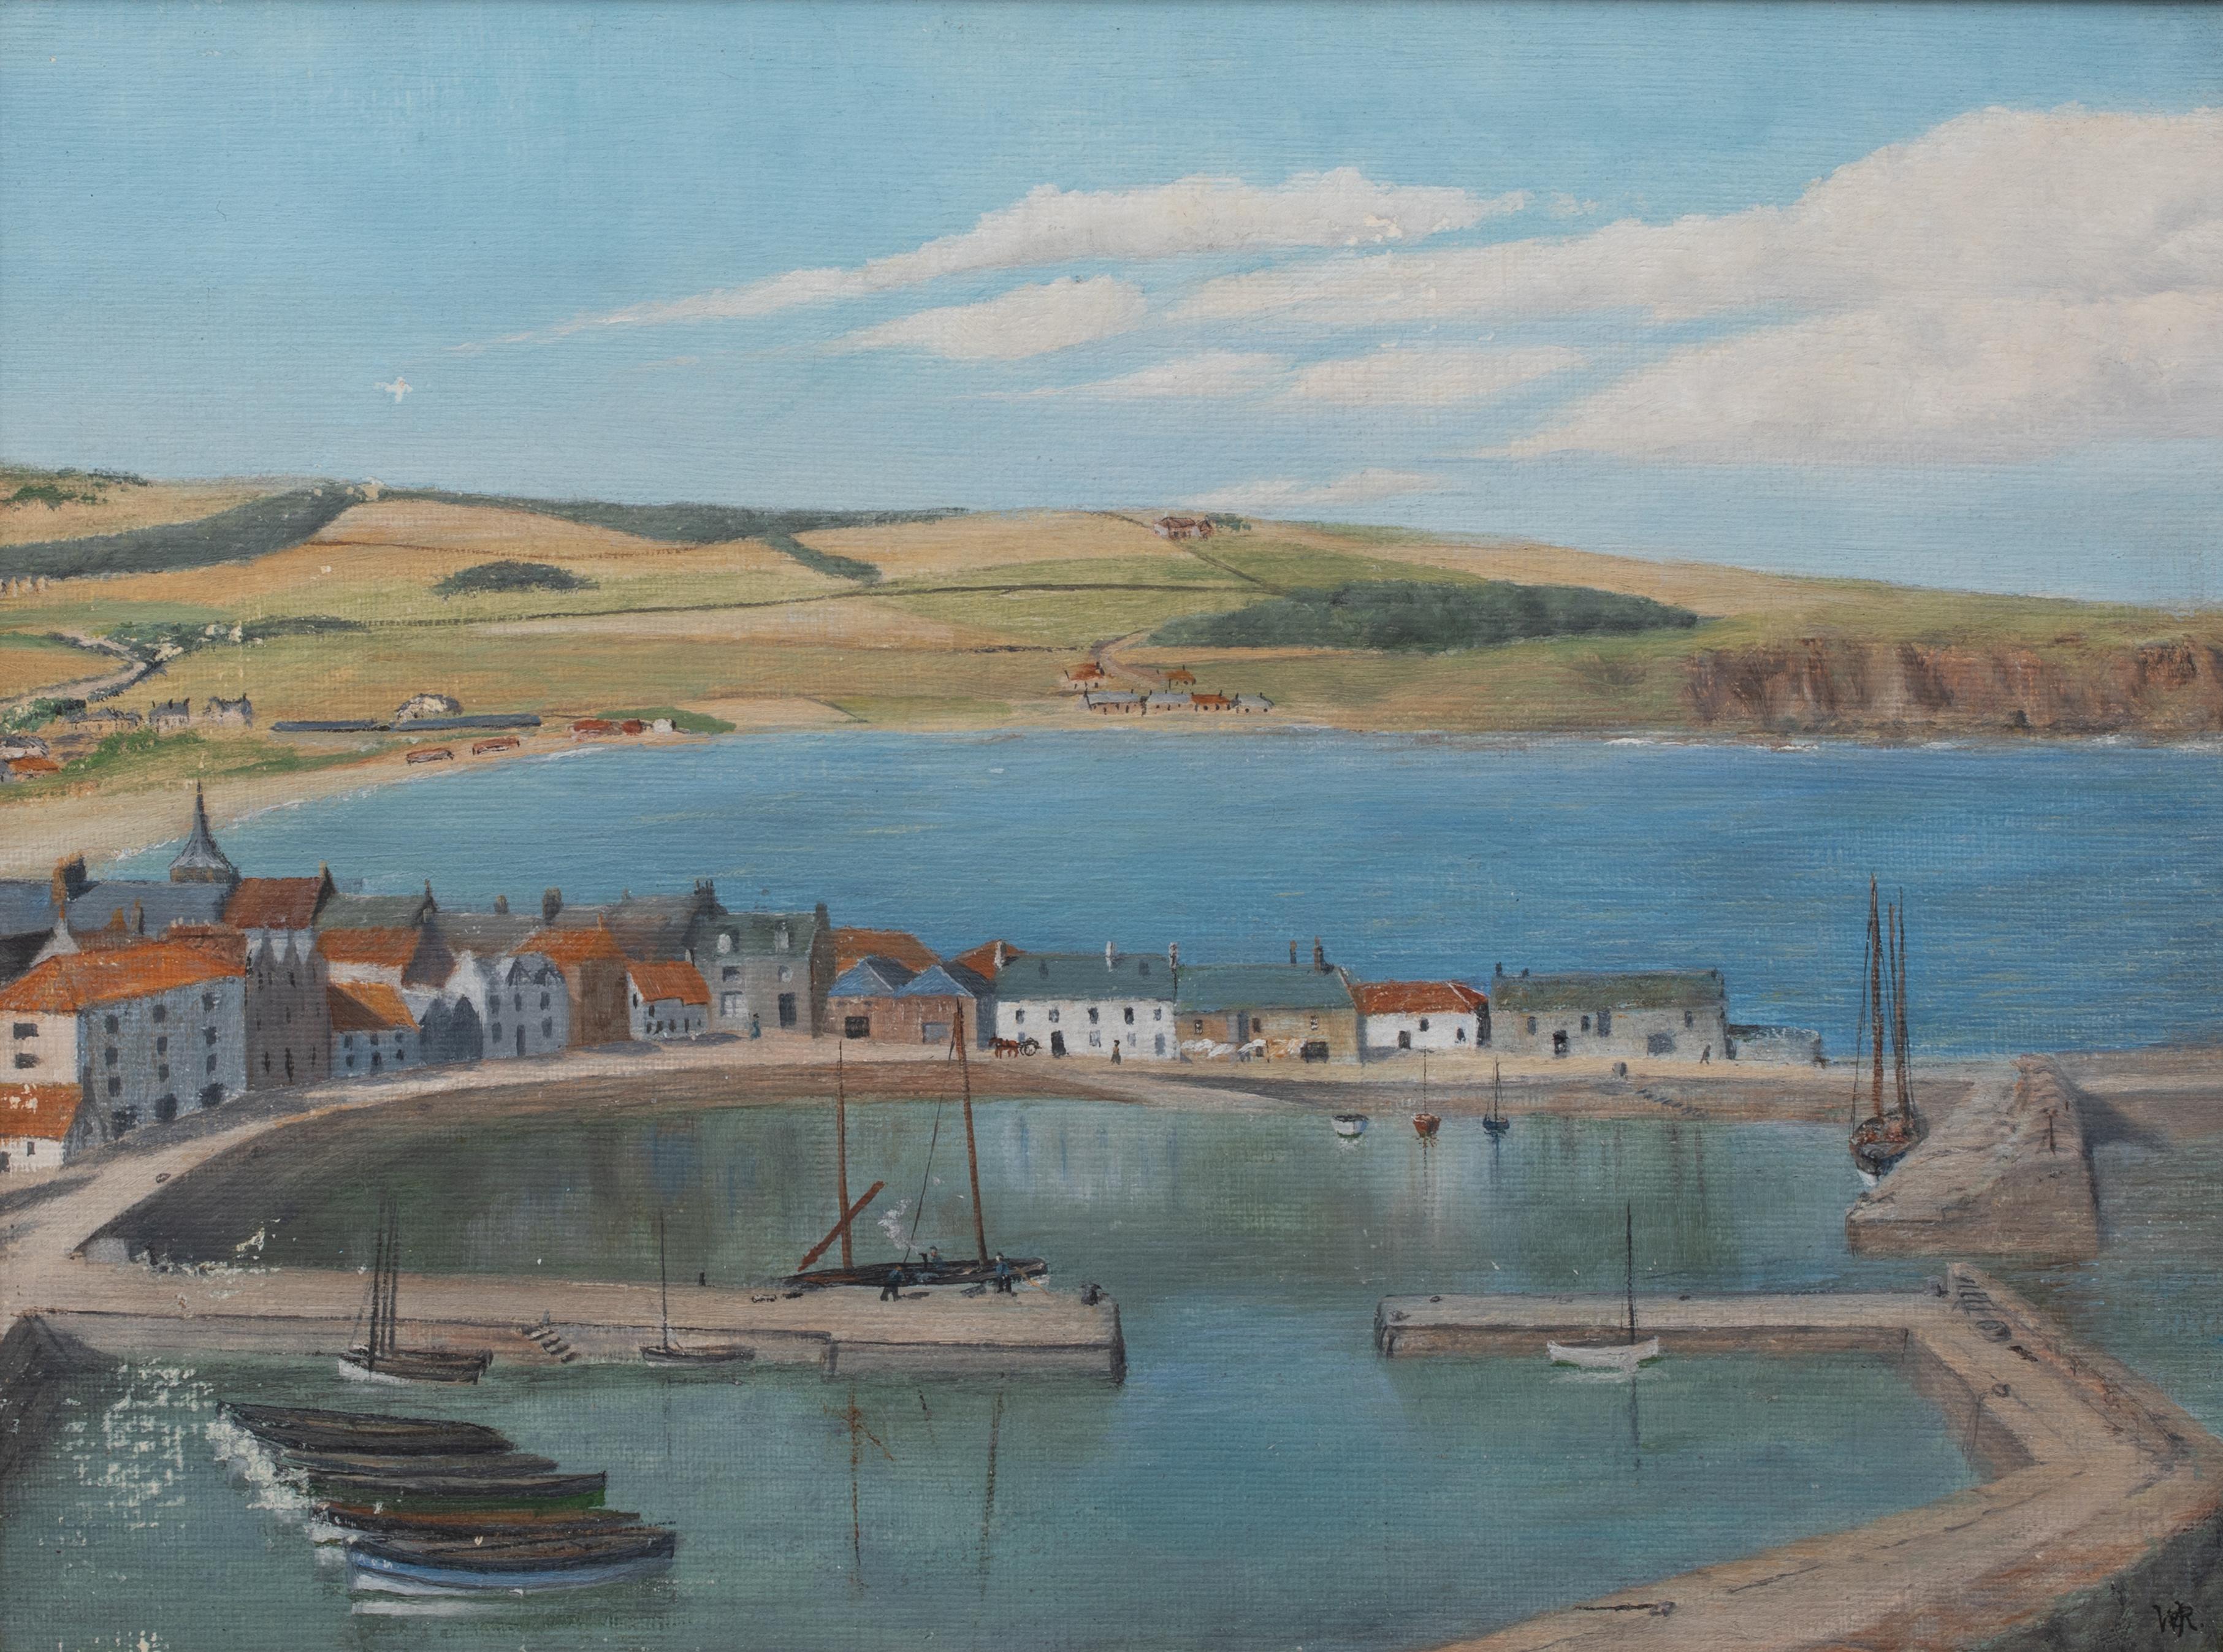 Cornwall Harbour View, circa 1930

by Sir Walter Westley Russell CVO RA (1867-1949)

Circa 1930 view of a Cornish harbour, oil on board by Sir Walter Westley Russell. Excellent and rare example of the painters work taking a high persecutive of the